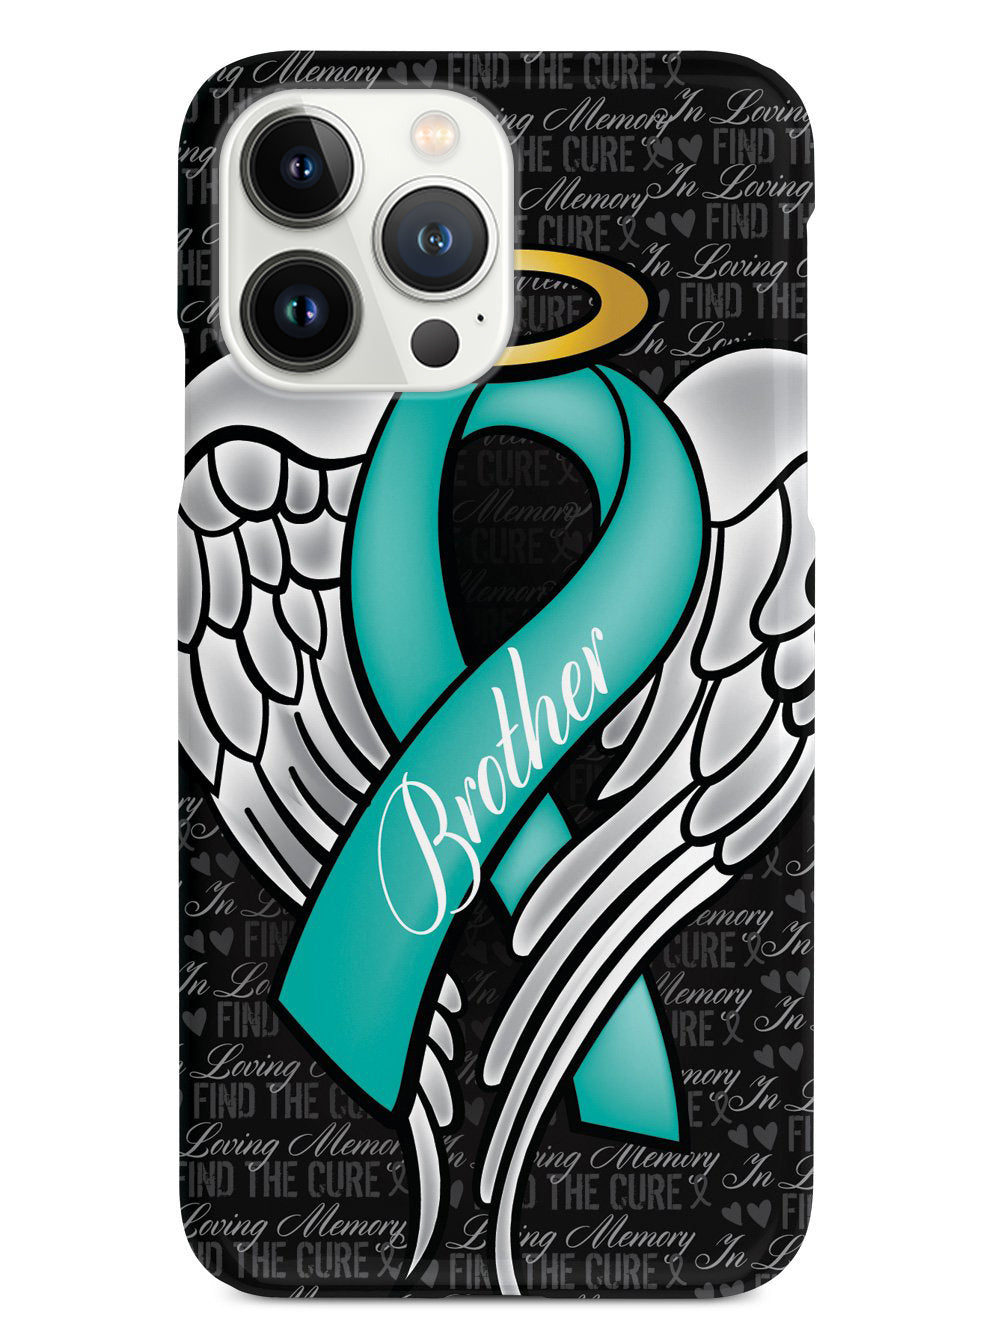 In Loving Memory of My Brother - Teal Ribbon Case